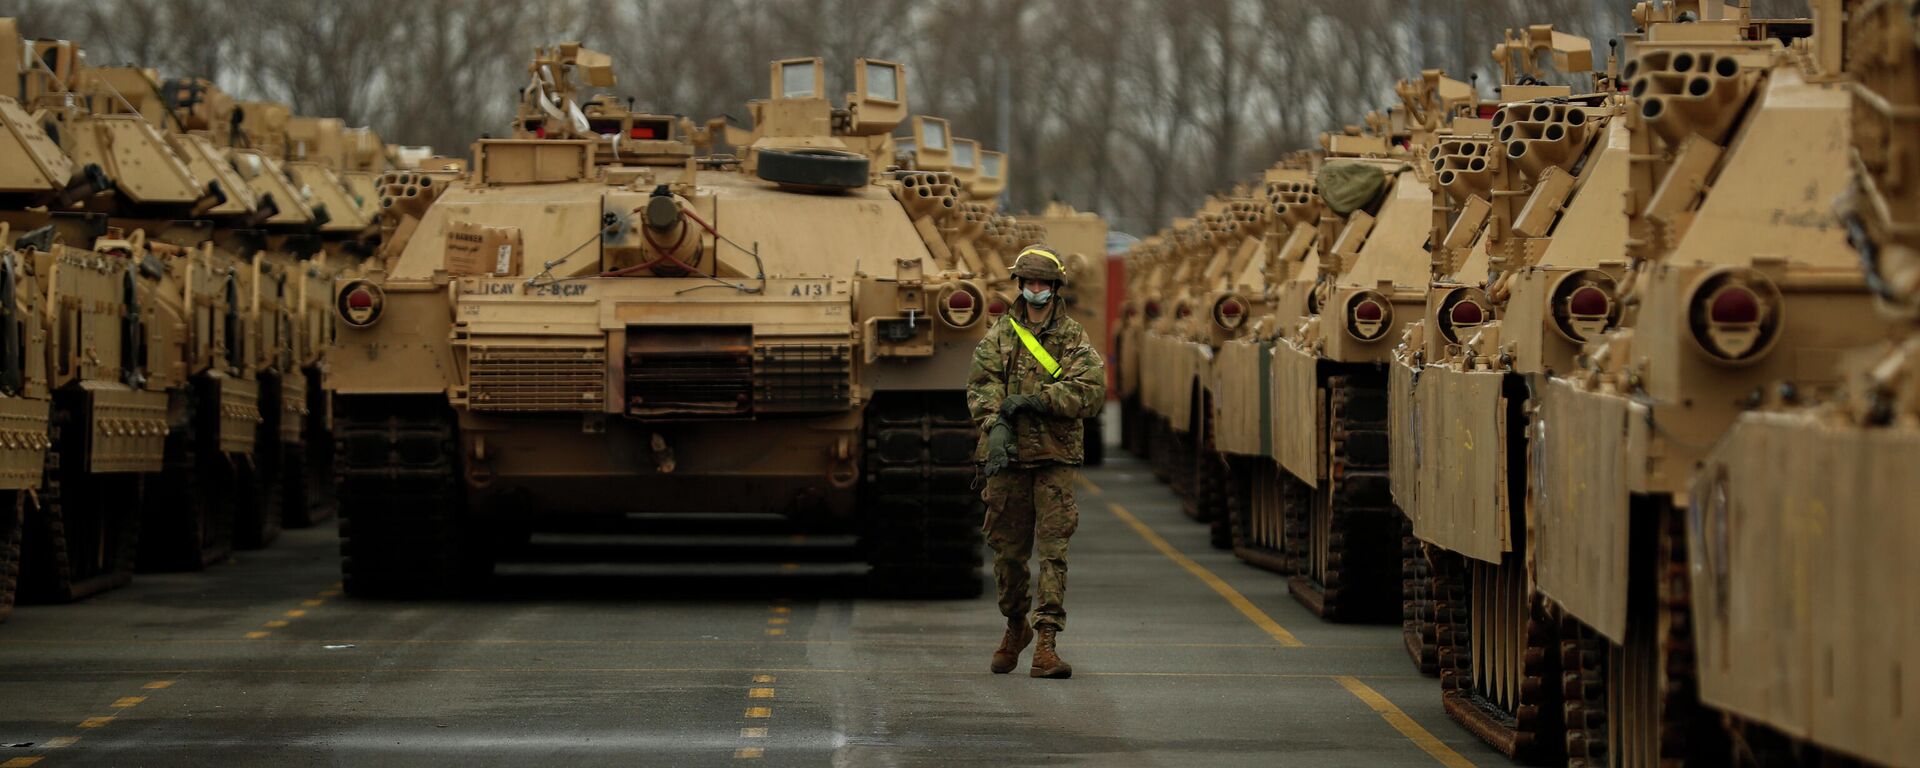 A U.S. soldier walks past parked armoured vehicles and tanks of the 1st Armored Brigade Combat Team and 1st Calvary Division, based out of Fort Hood, Texas, as they are unloaded at the port of Antwerp, Belgium, Monday, Nov. 16, 2020. The U.S. military vehicles are on their way to Eastern Europe to take part in the Atlantic Resolve military exercises, in which American troops train together with NATO partners to help ensure stability in Europe. - Sputnik International, 1920, 24.01.2023